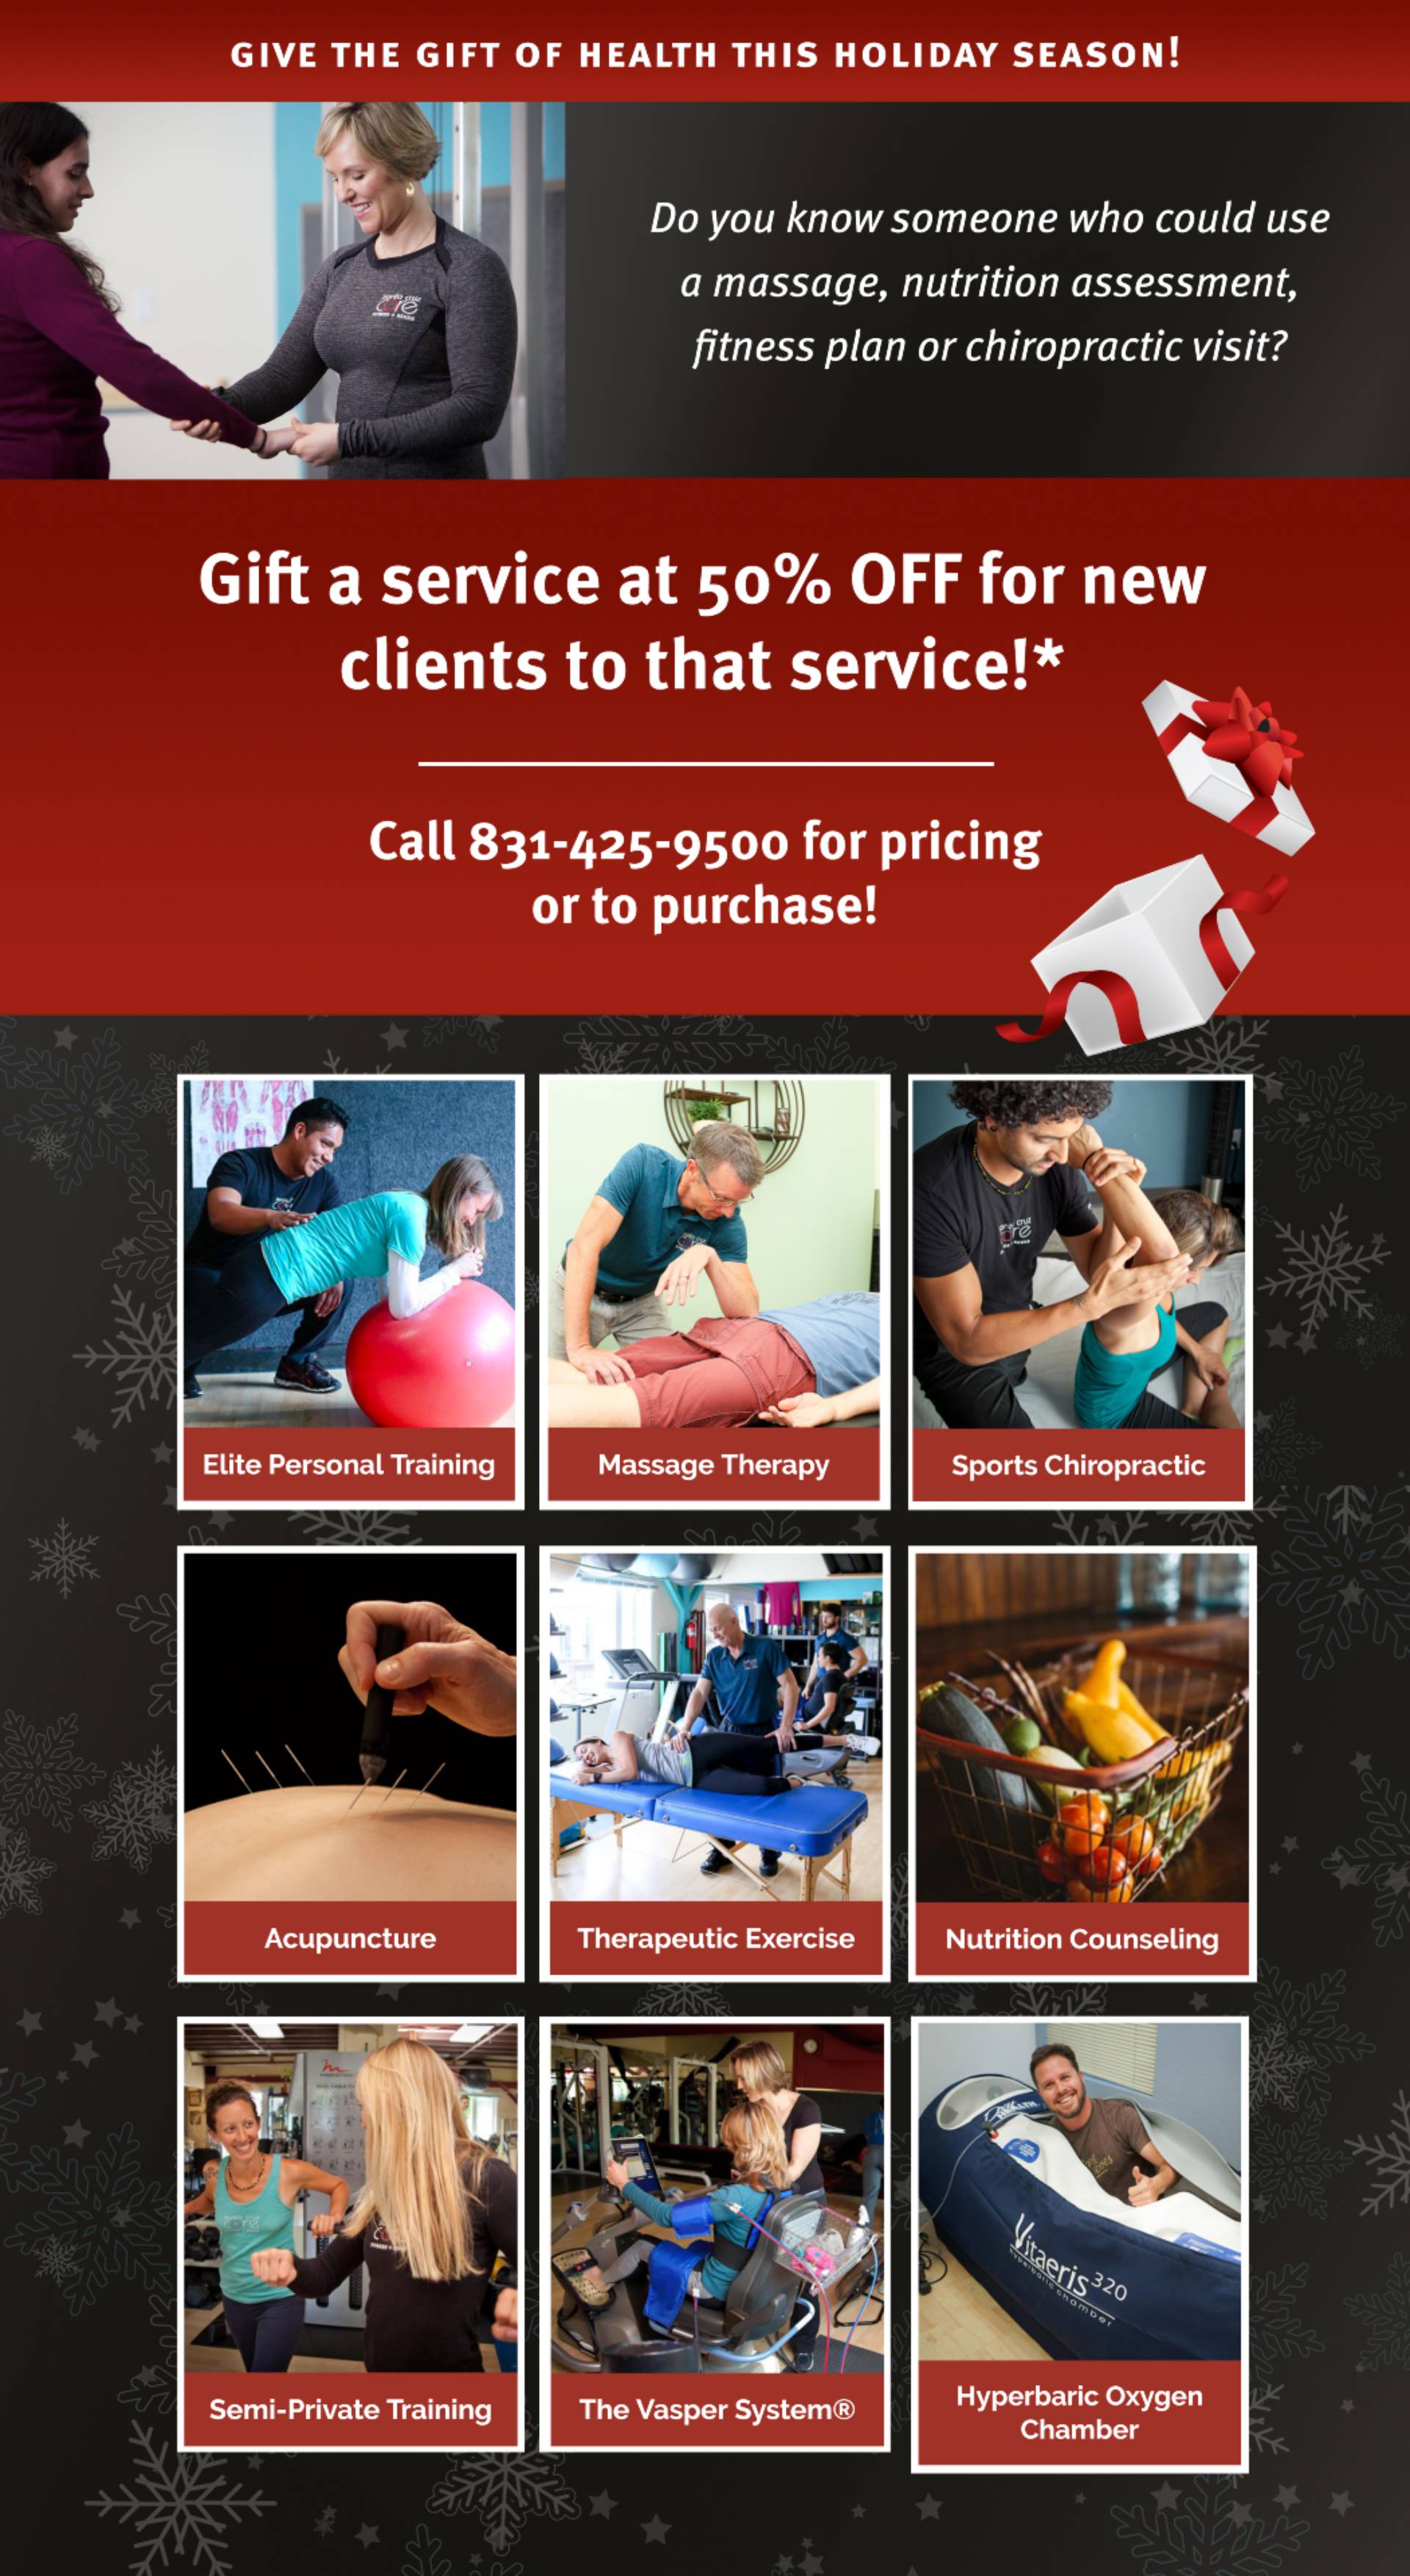 50% off when you gift a service to a new client to that service!